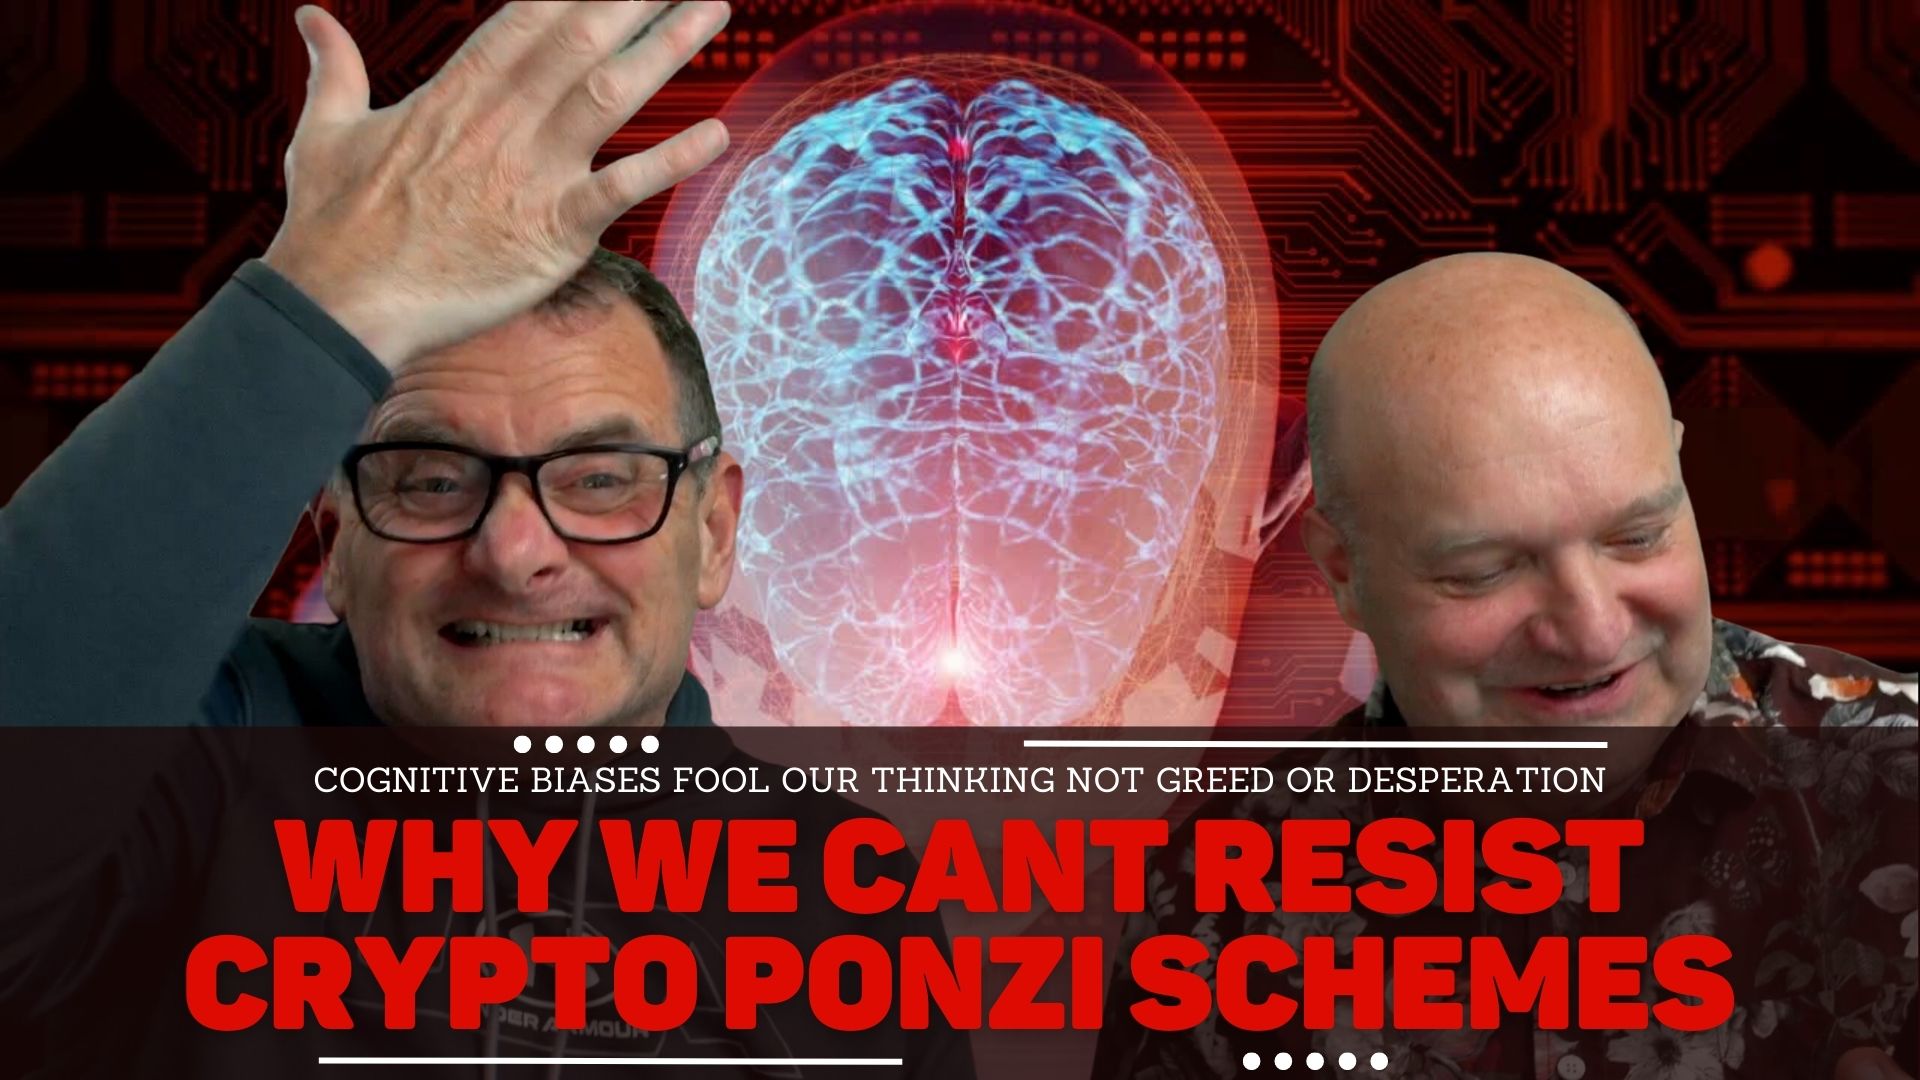 Why we cant Resist Crypto Ponzi Schemes: Cognitive Biases Fool our Thinking NOT Greed or Desperation